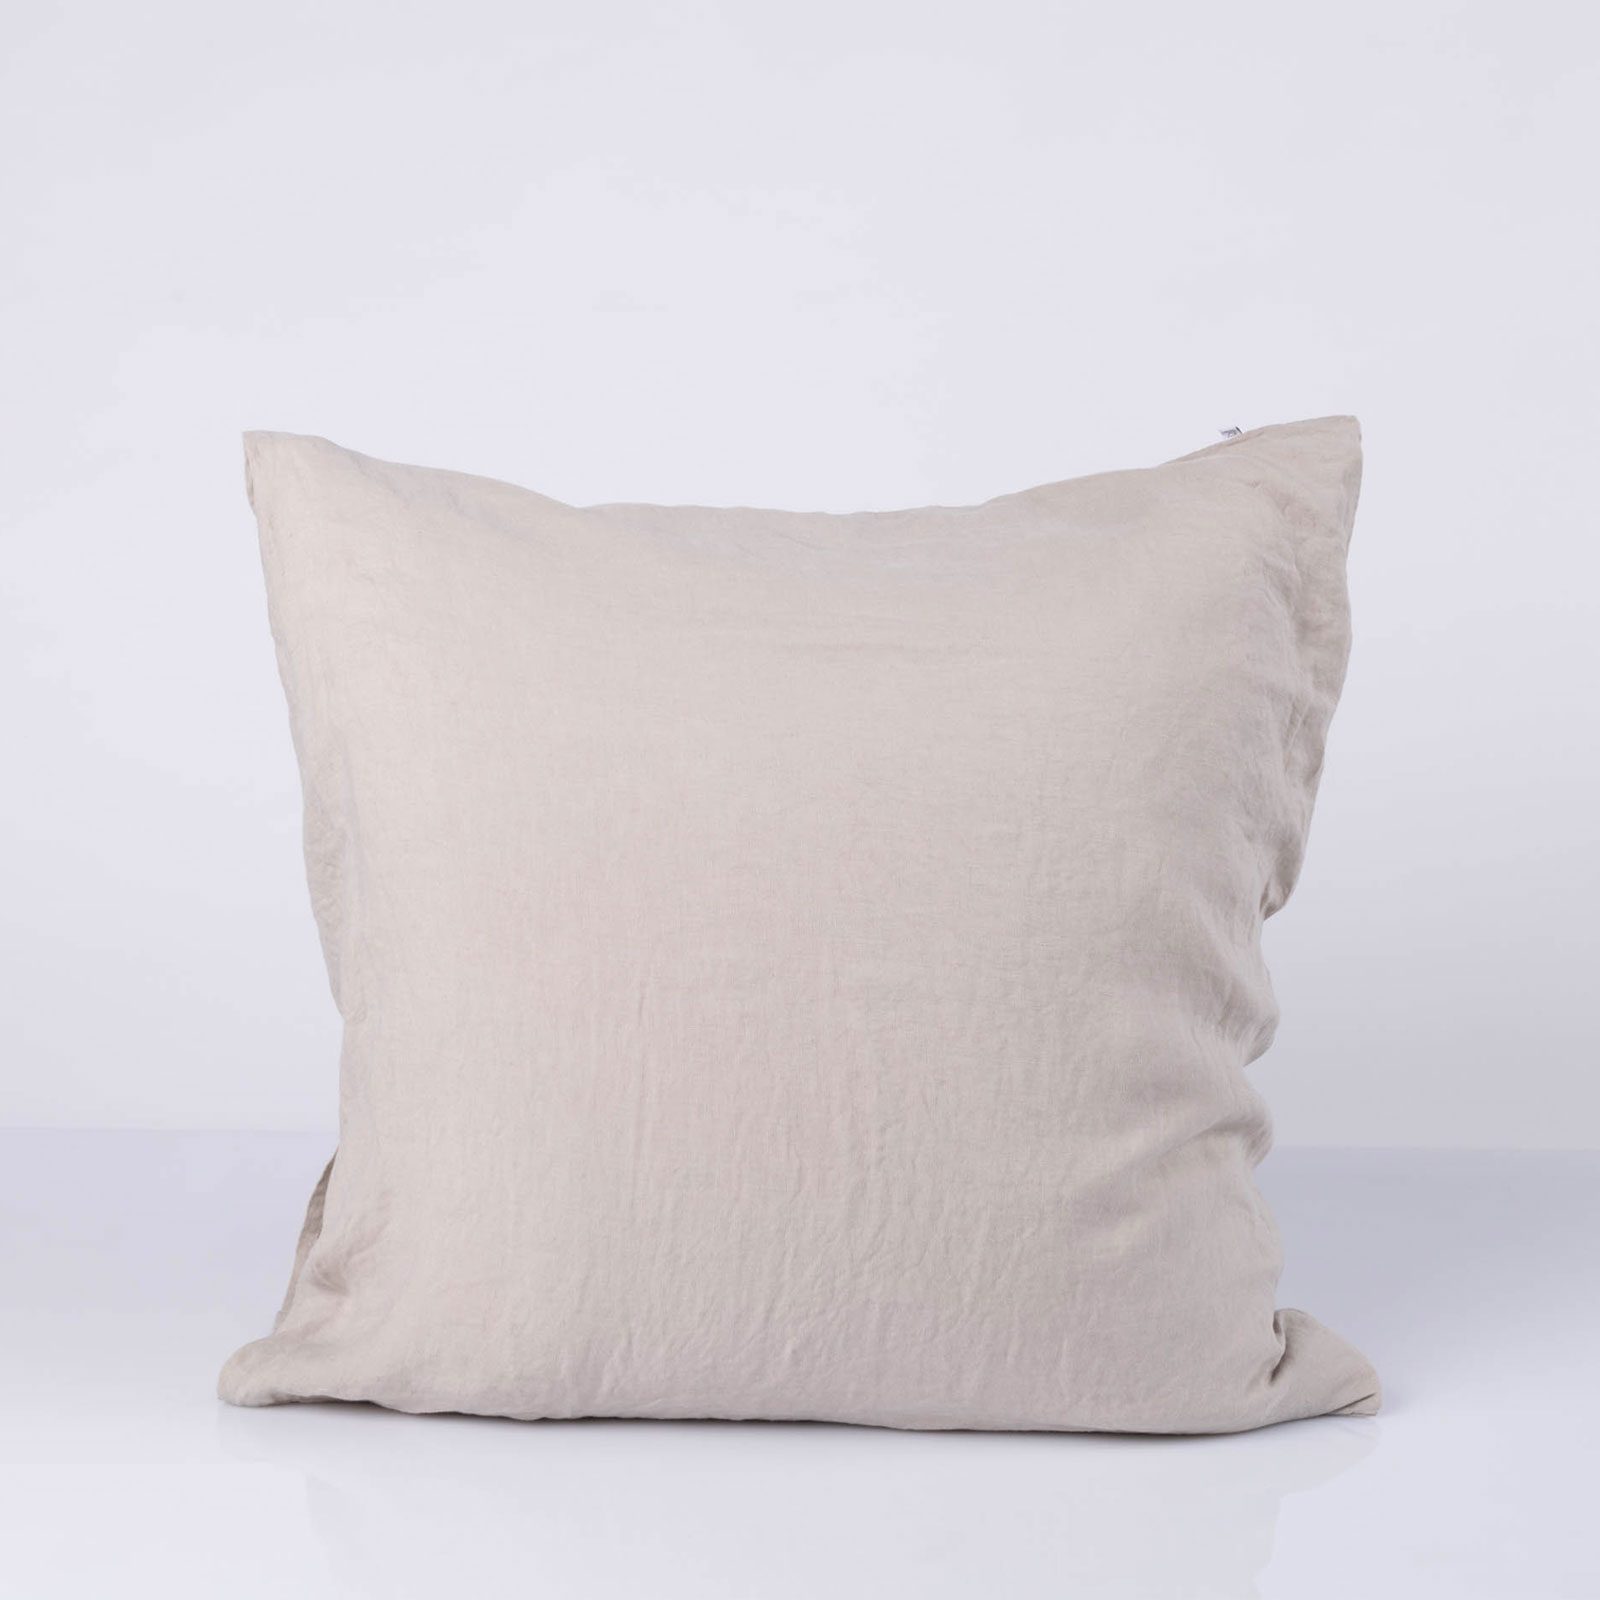 stone-washed-linen-pillowcase-natural-1